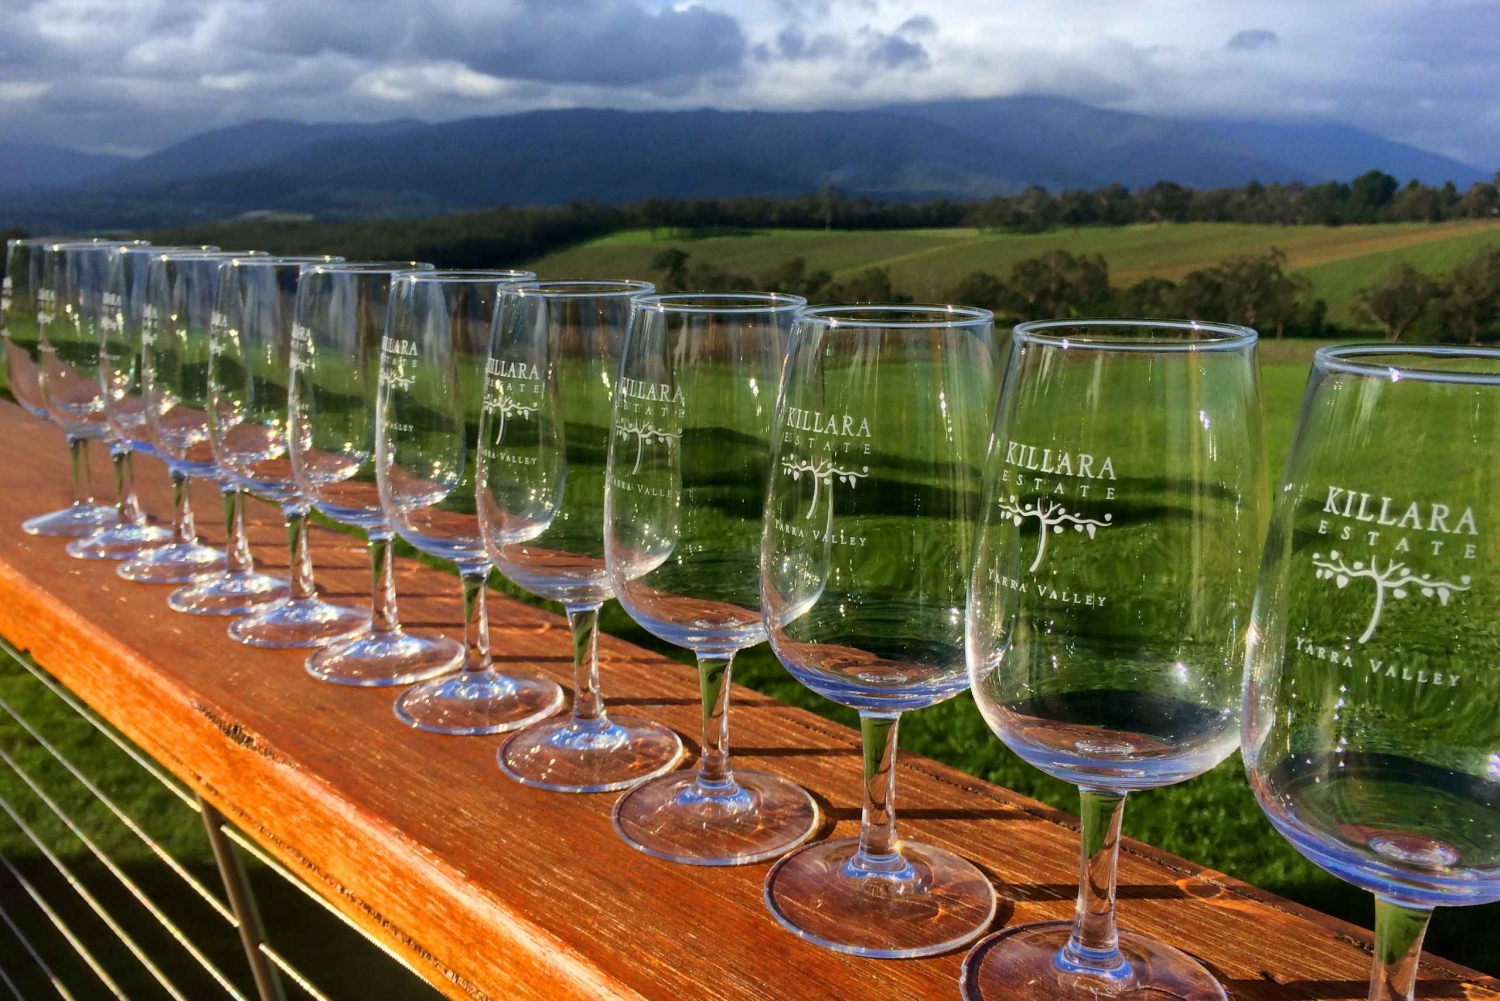 Yarra Valley: Wine, Cider, and Chocolates Day Tour